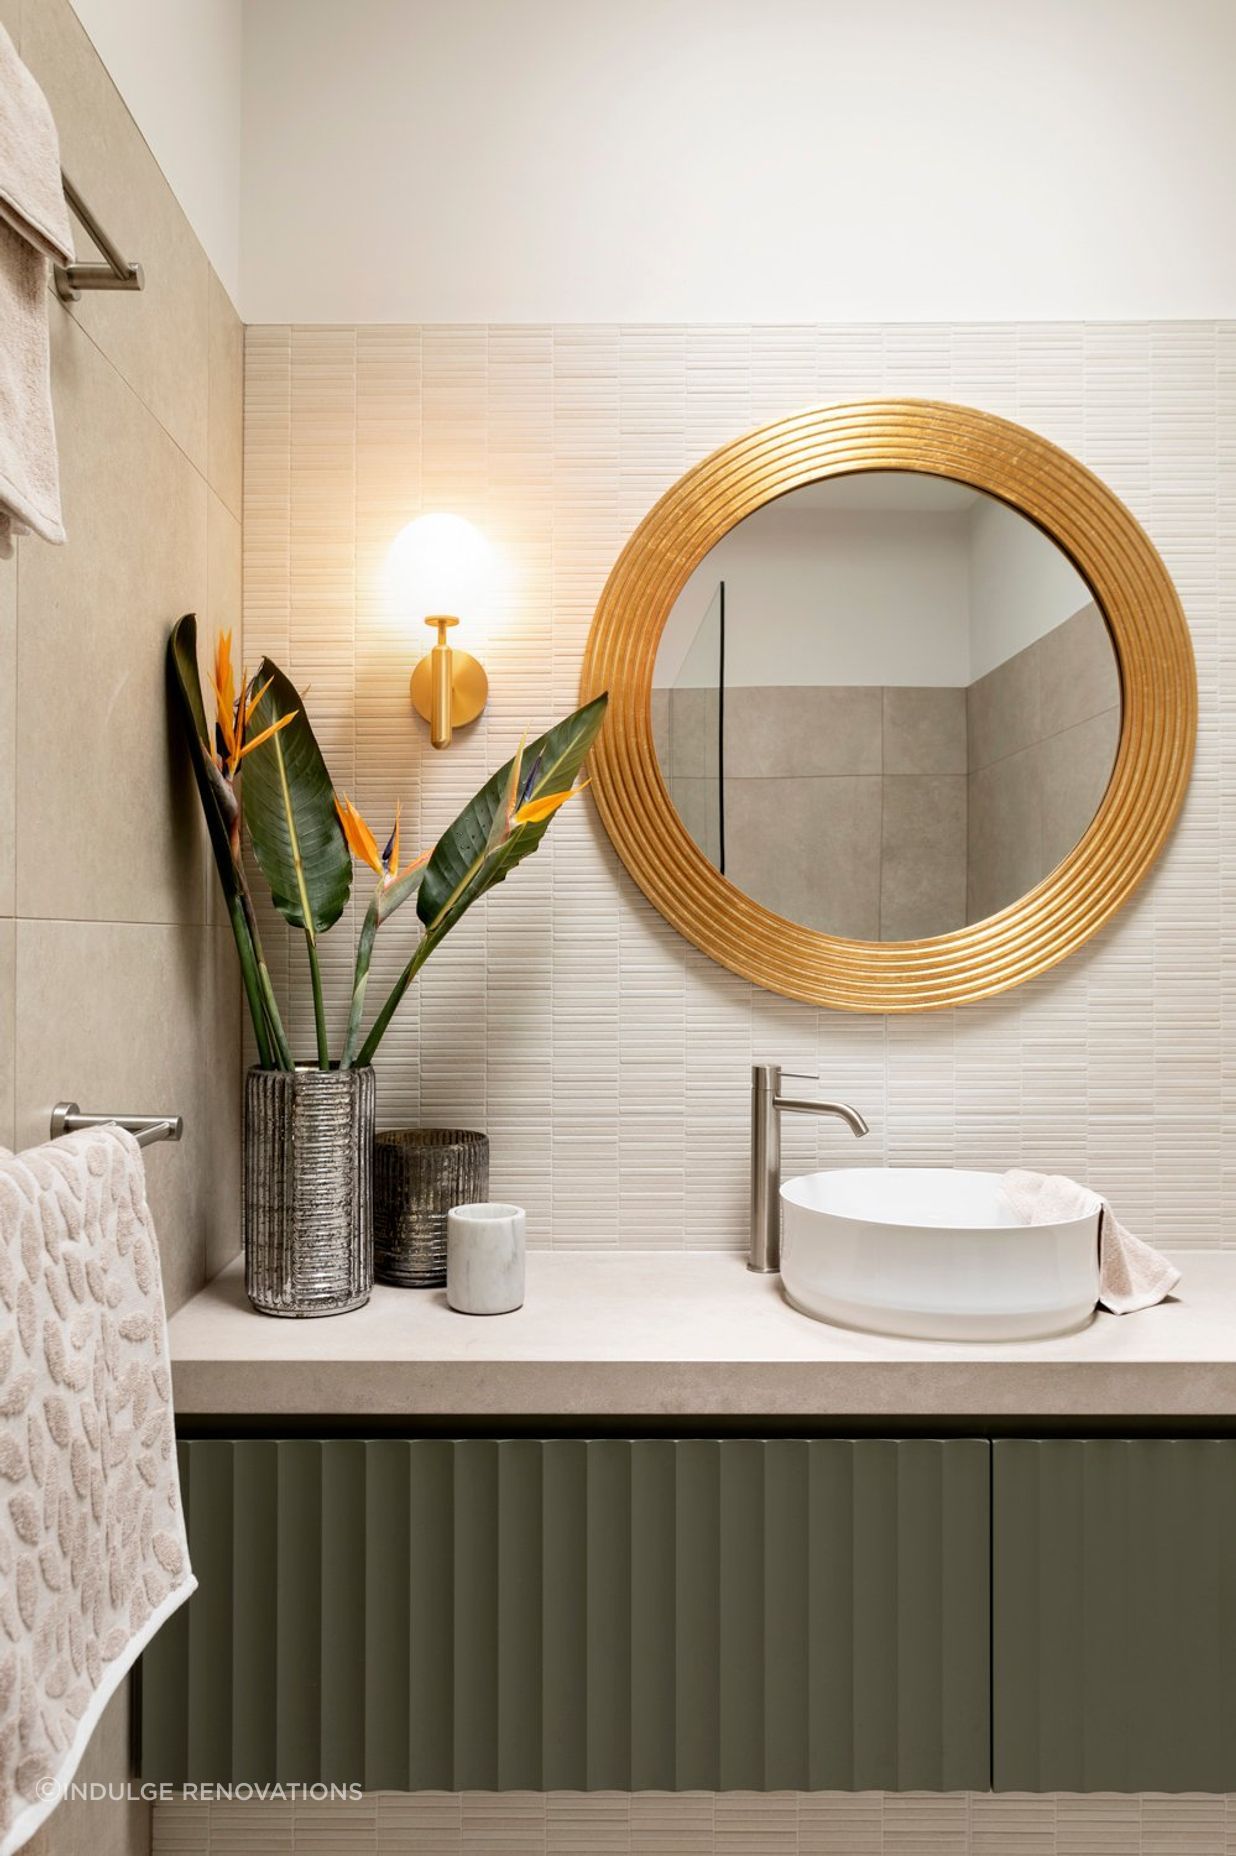 Unique mirrors can play a key role in a small bathroom renovation project.